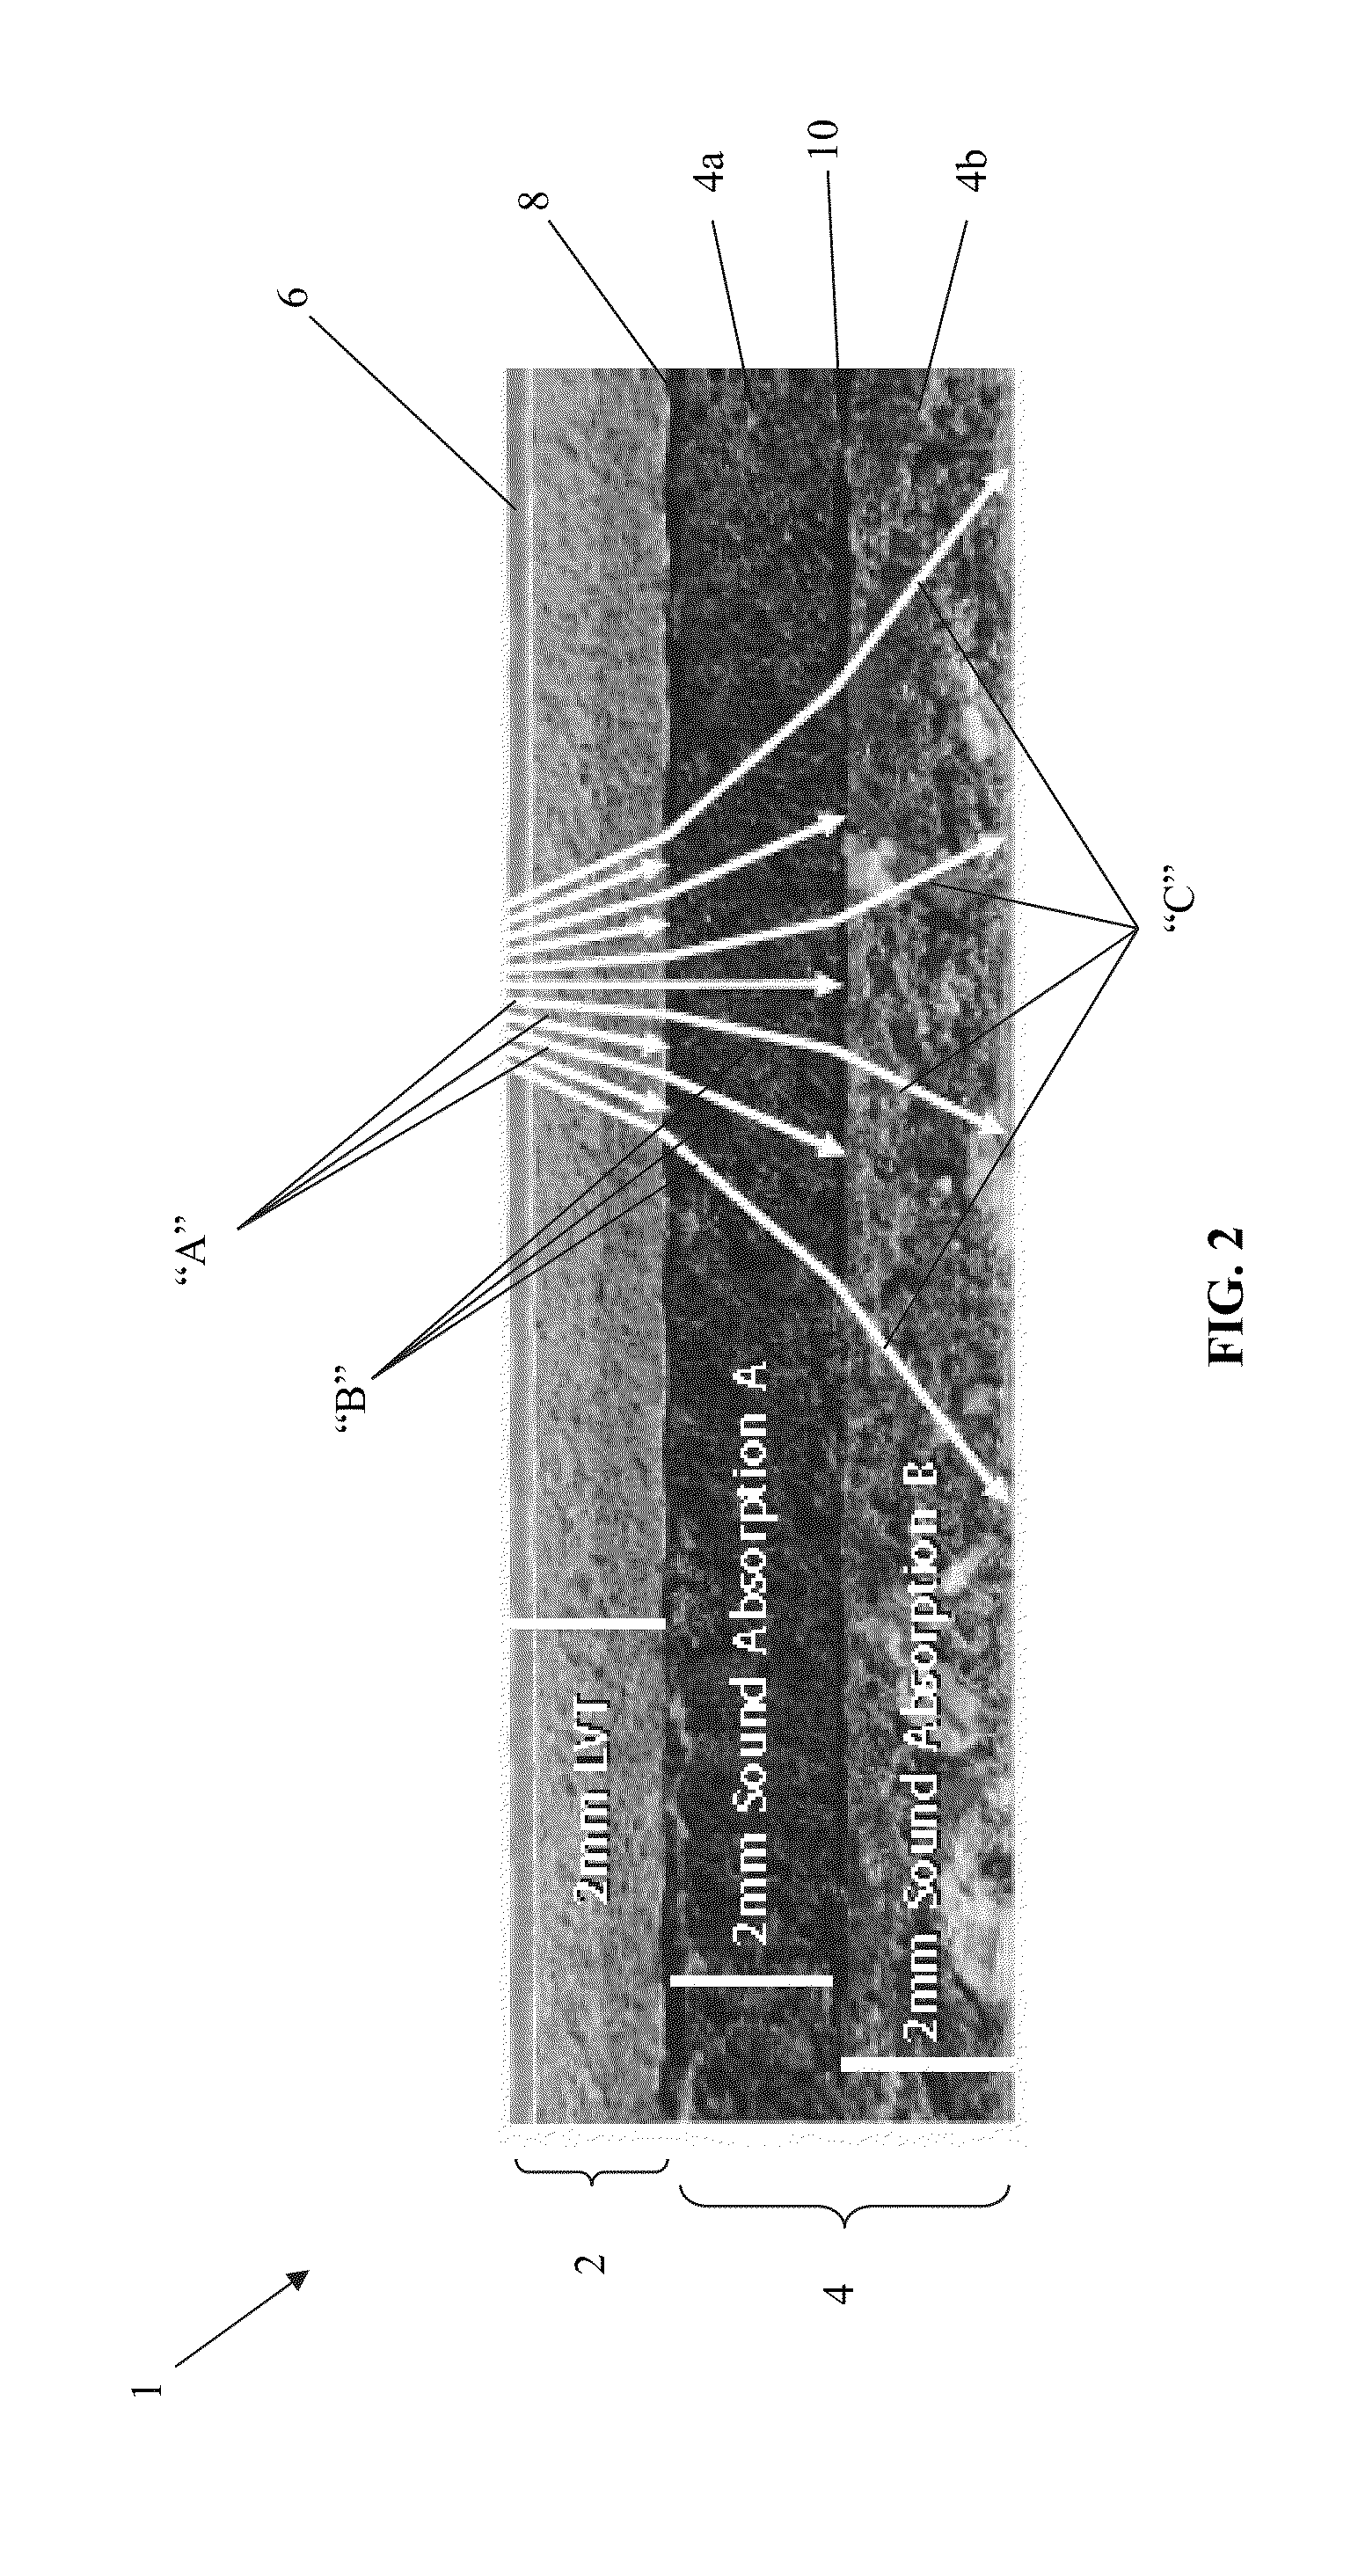 Multi-layer acoustical flooring tile and method of manufacture